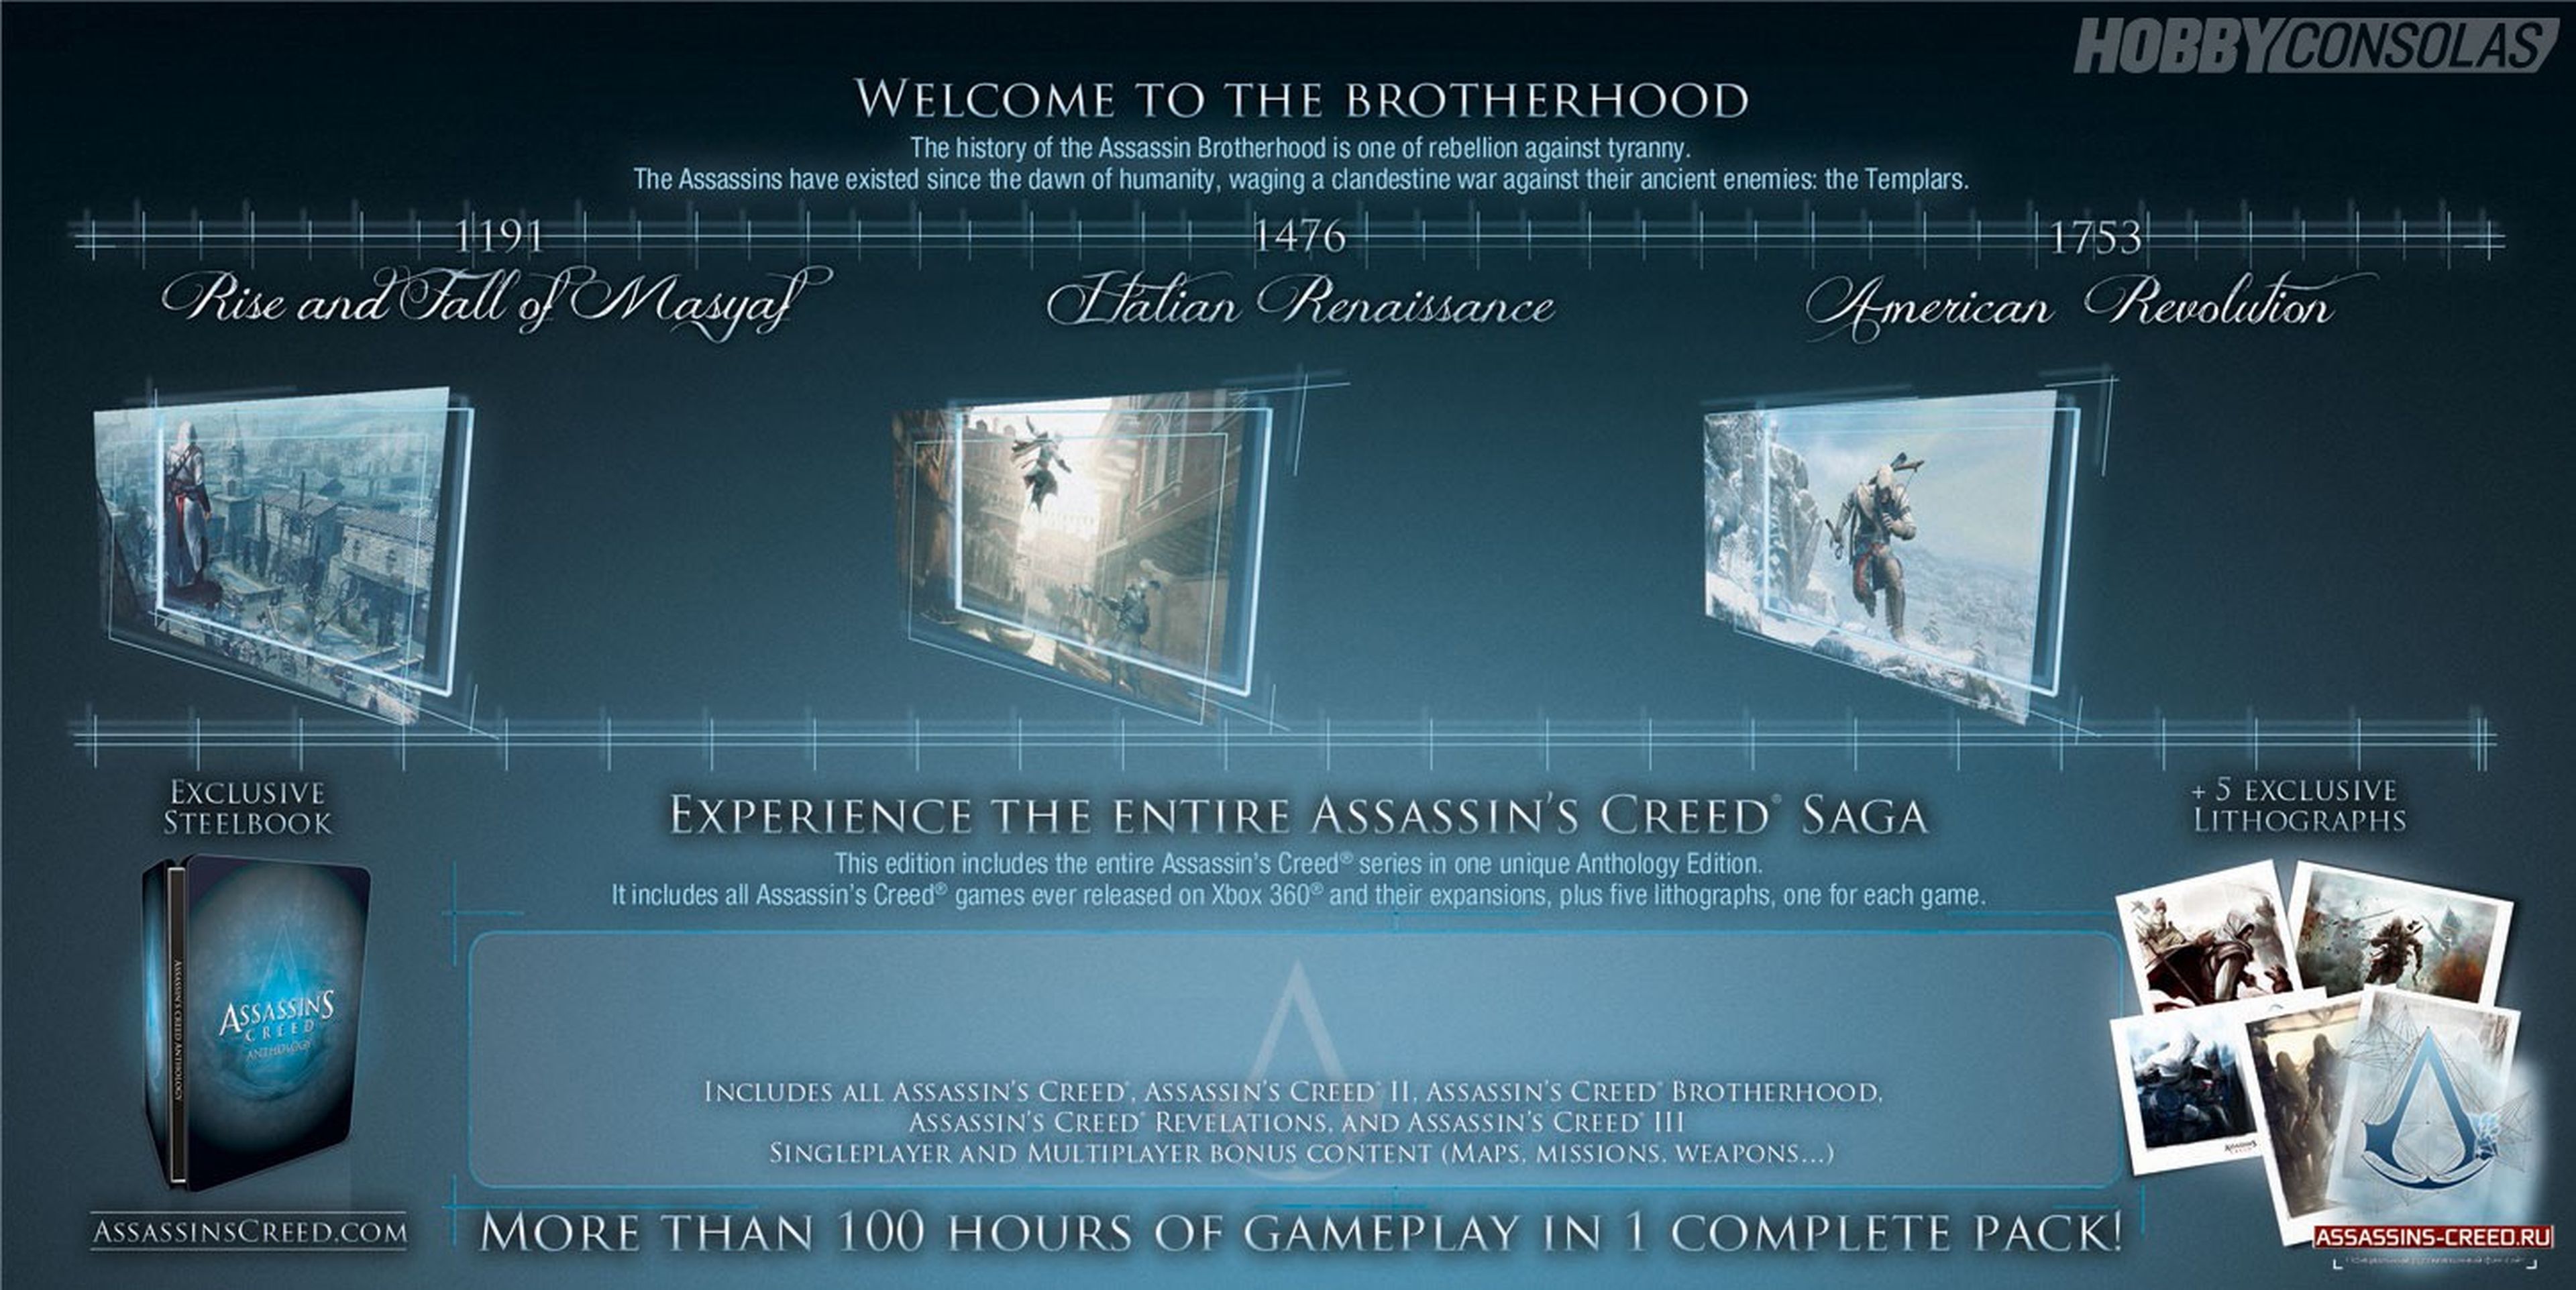 Assassin's Creed Anthology, colección definitiva